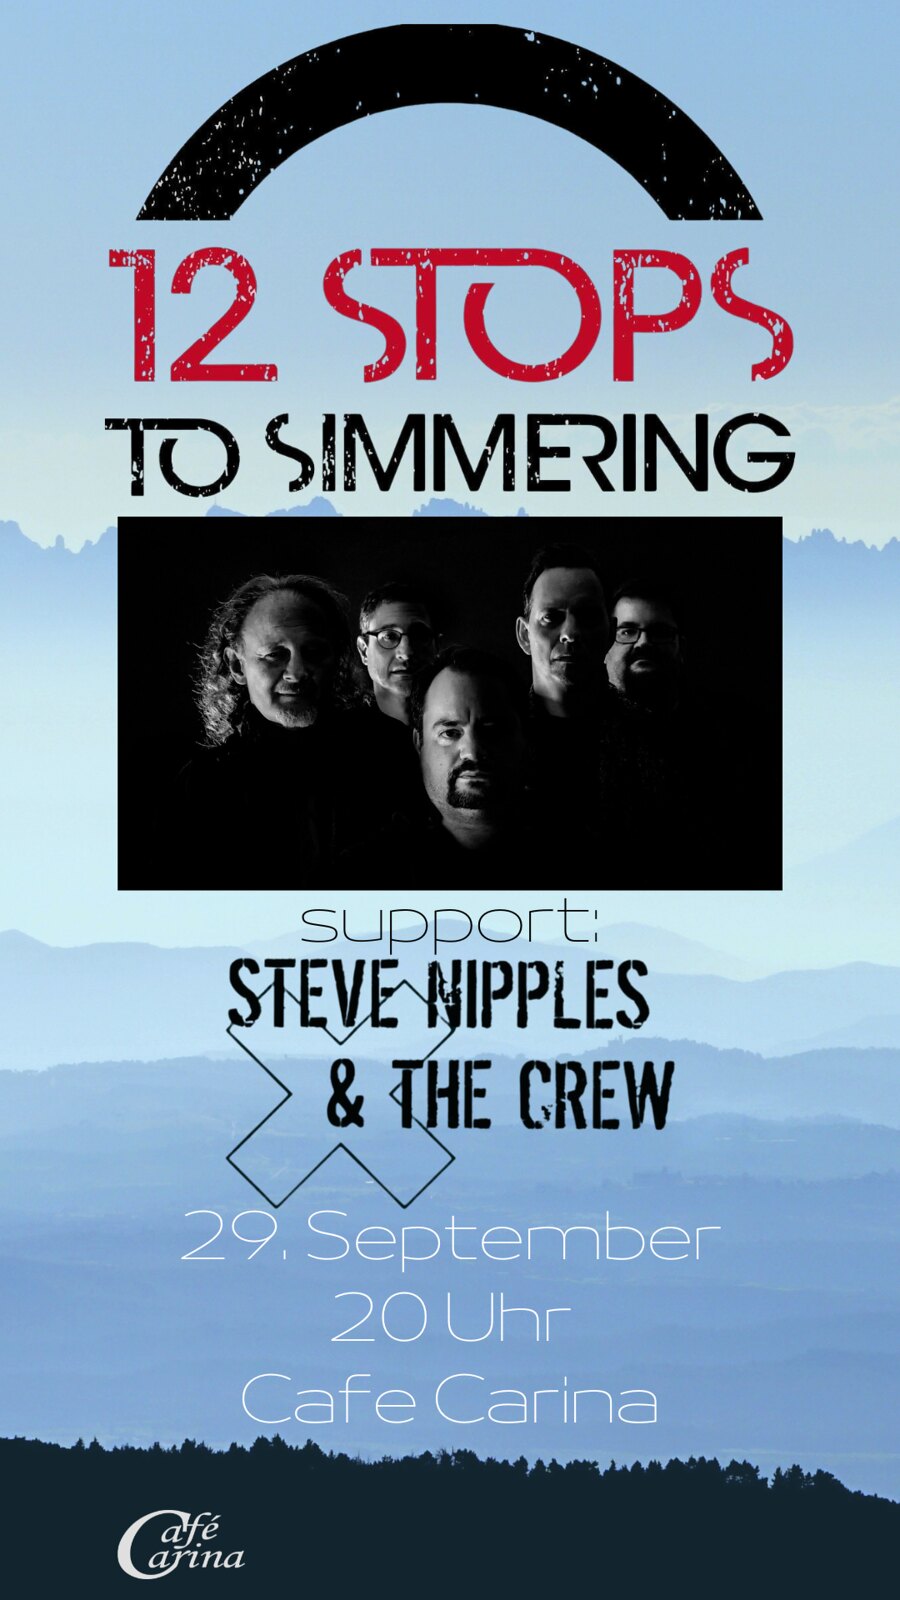 12 Stops to Simmering / STEVE NIPPLES & THE CREW